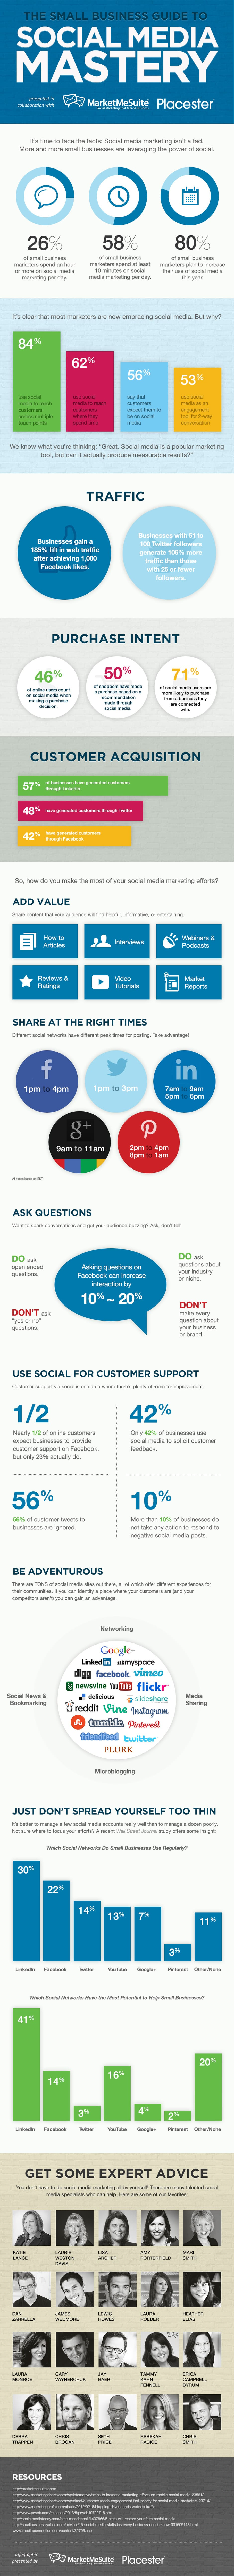 Small Business Guide To Social Media Mastery [Infographic]